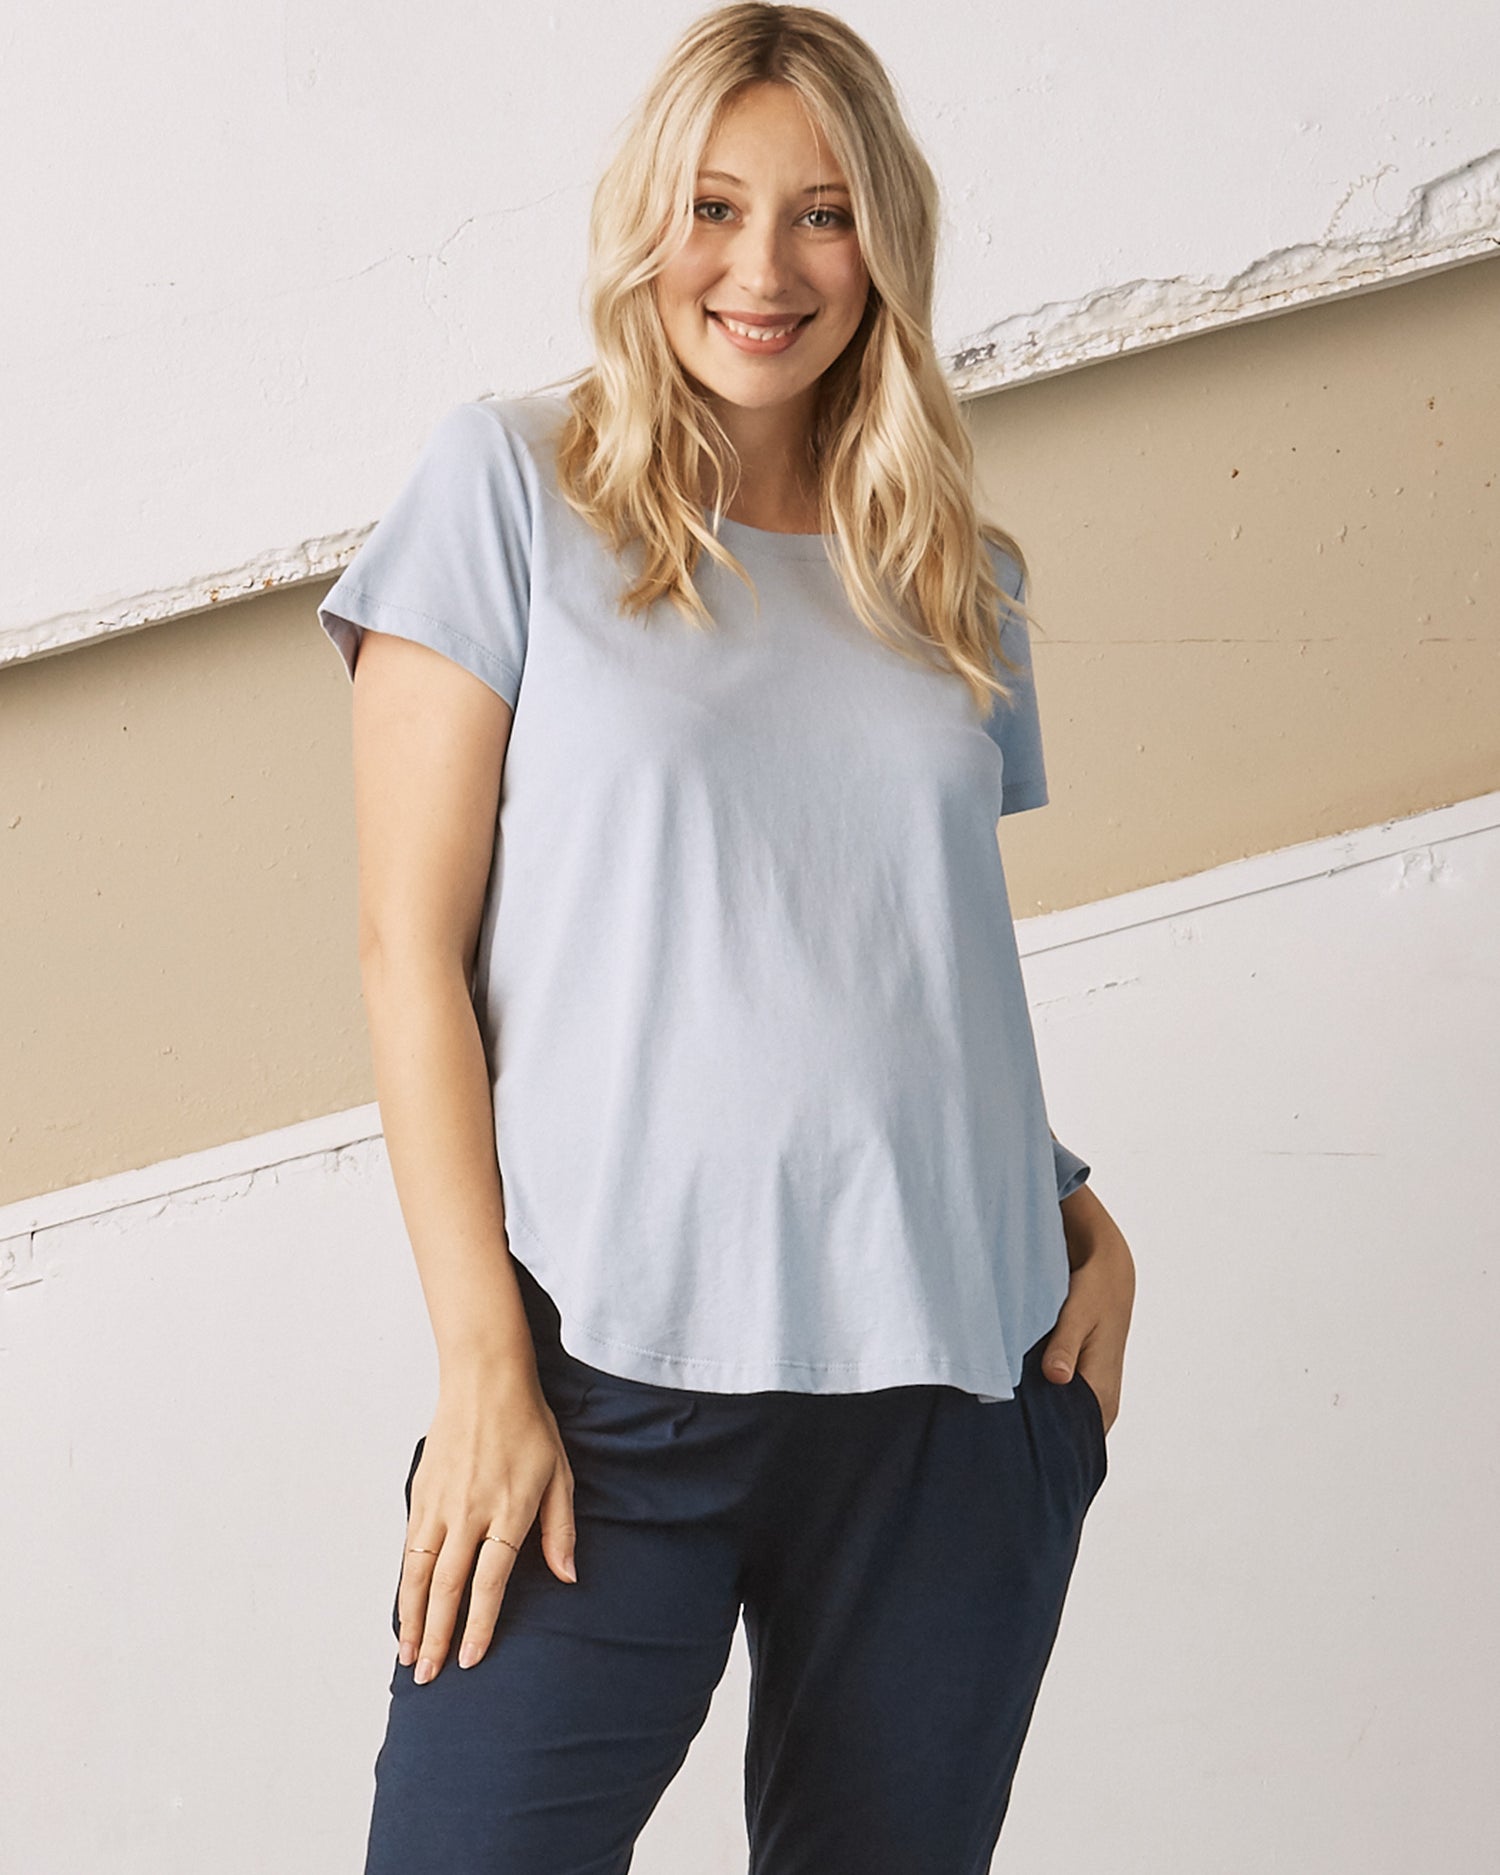 Main view - A Pregnant Woman in Basic Ice Blue Short Sleeve Maternity Cotton T-shirt (6708951613543)